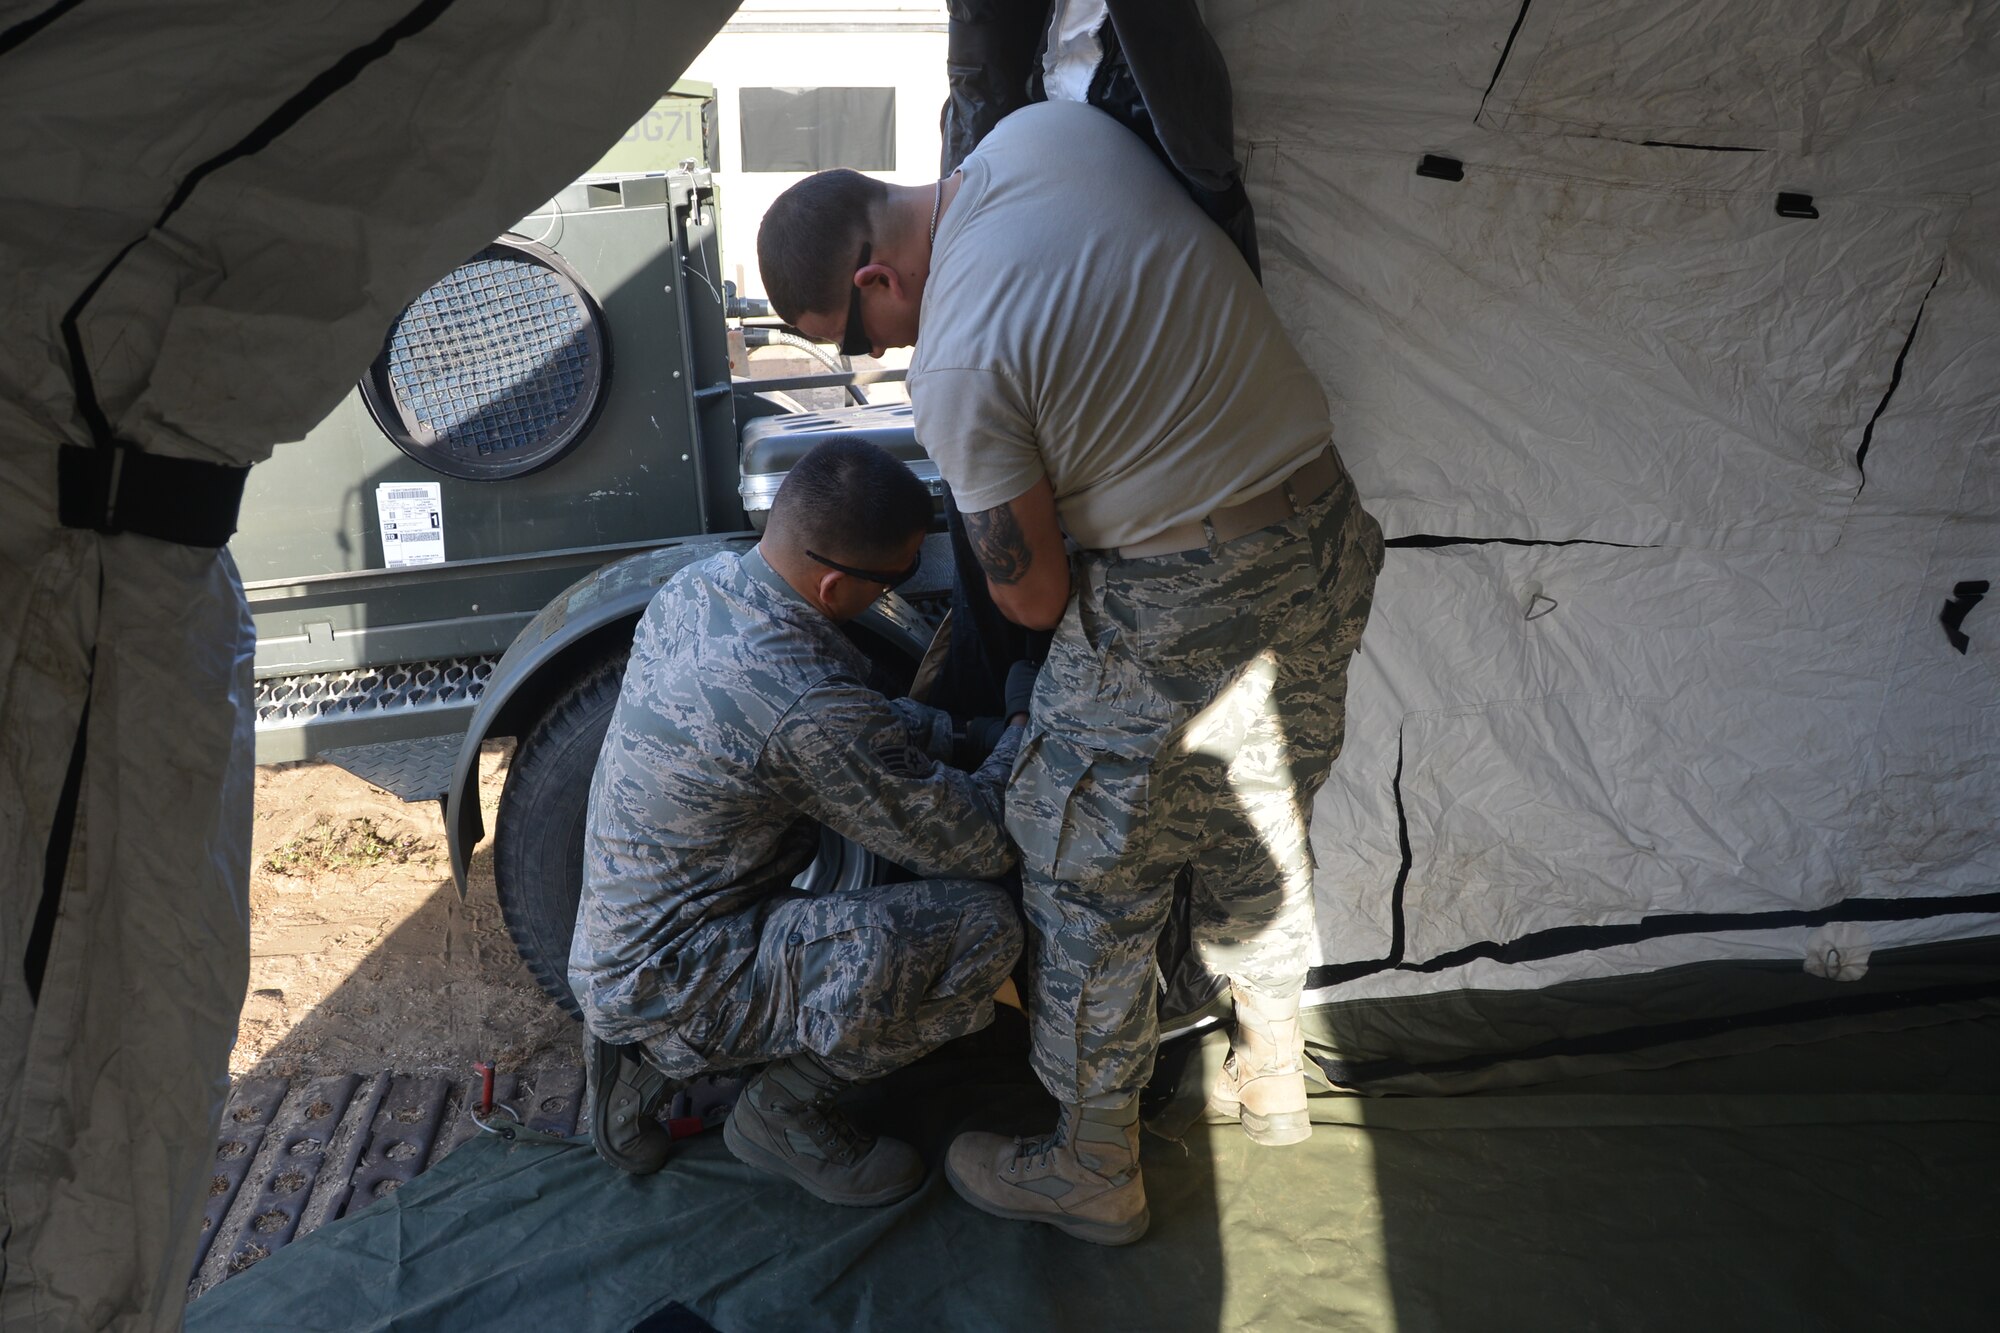 Airmen from the 433rd Airlift Wing, Joint Base San Antonio-Lackland, Texas erect posts for The Deployable Rapid Assembly Shelter, or DRASH tent, 24 April, 2014, Naval Air Station, North Island, Calif. A DRASH tent is a quick-erect tent system that integrates shelter, mobility, lighting, heating, cooling and energy efficient was used during the Air Force Reserve Command’s Patriot Hook Exercise.  Patriot Hook is an annual AFRC sponsored exercise that integrates federal agencies with the military, focusing on making the most of command and support, training, integration and practicing mobilizations to disasters and emergencies. (U.S. Air Force photo/Senior Master Sgt. Minnie Jones)



